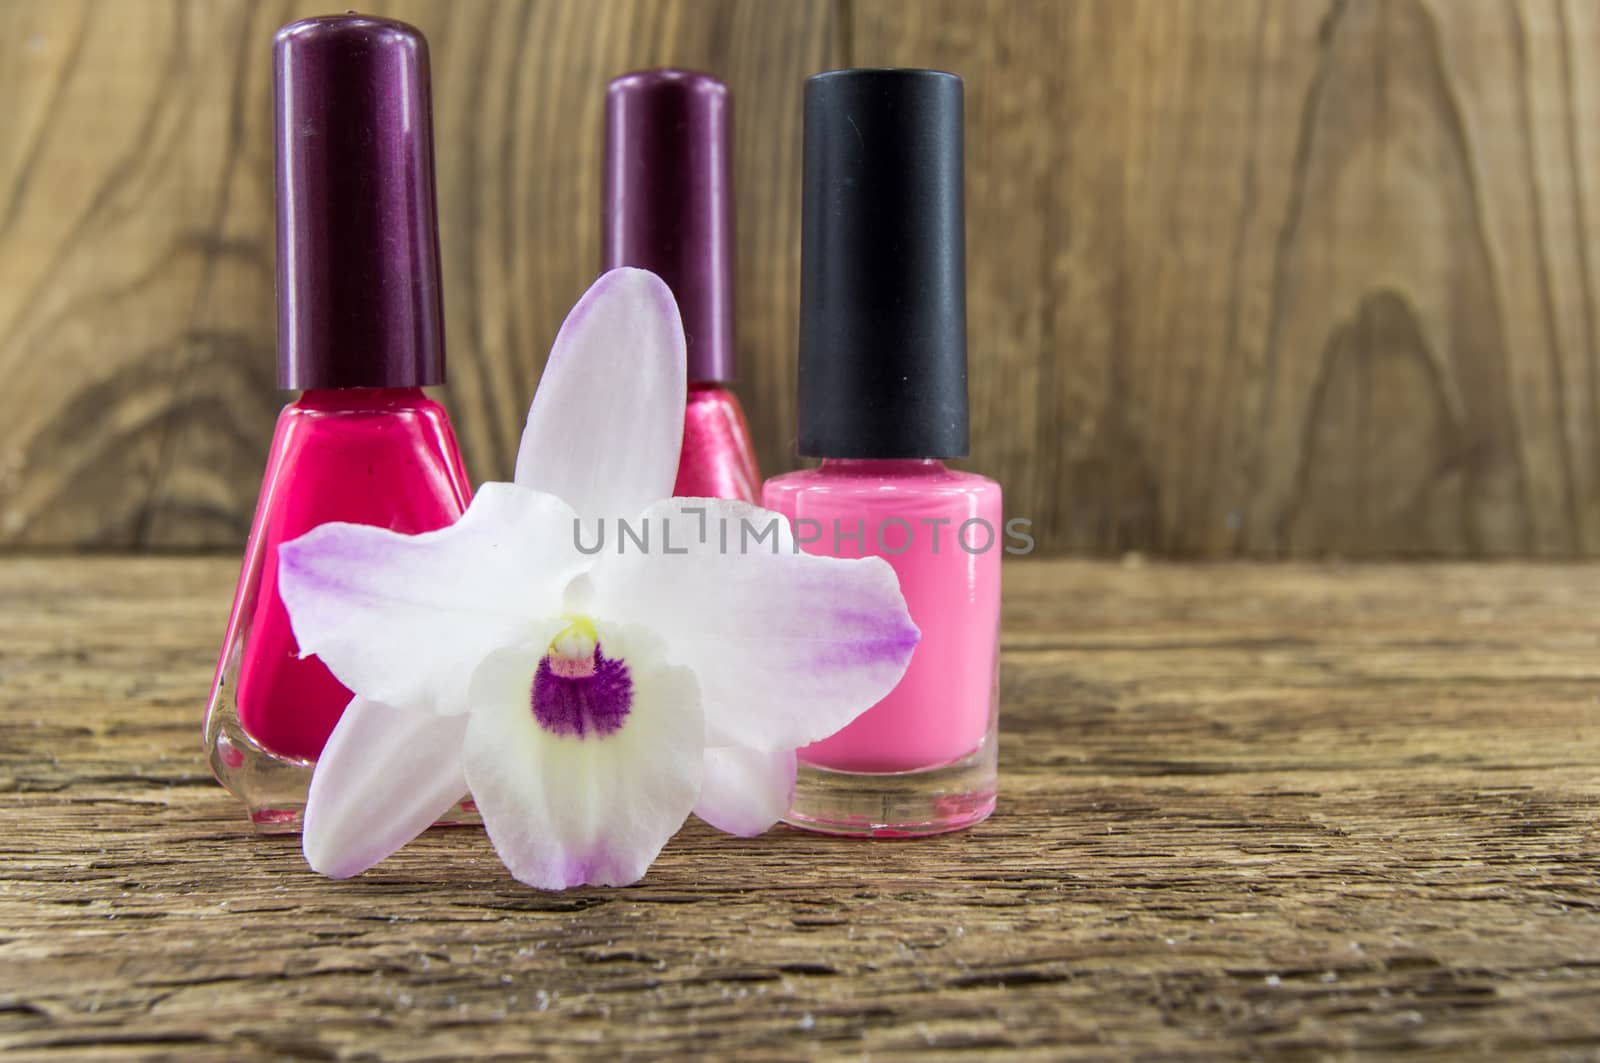 cosmetics and flowers on table on wooden background